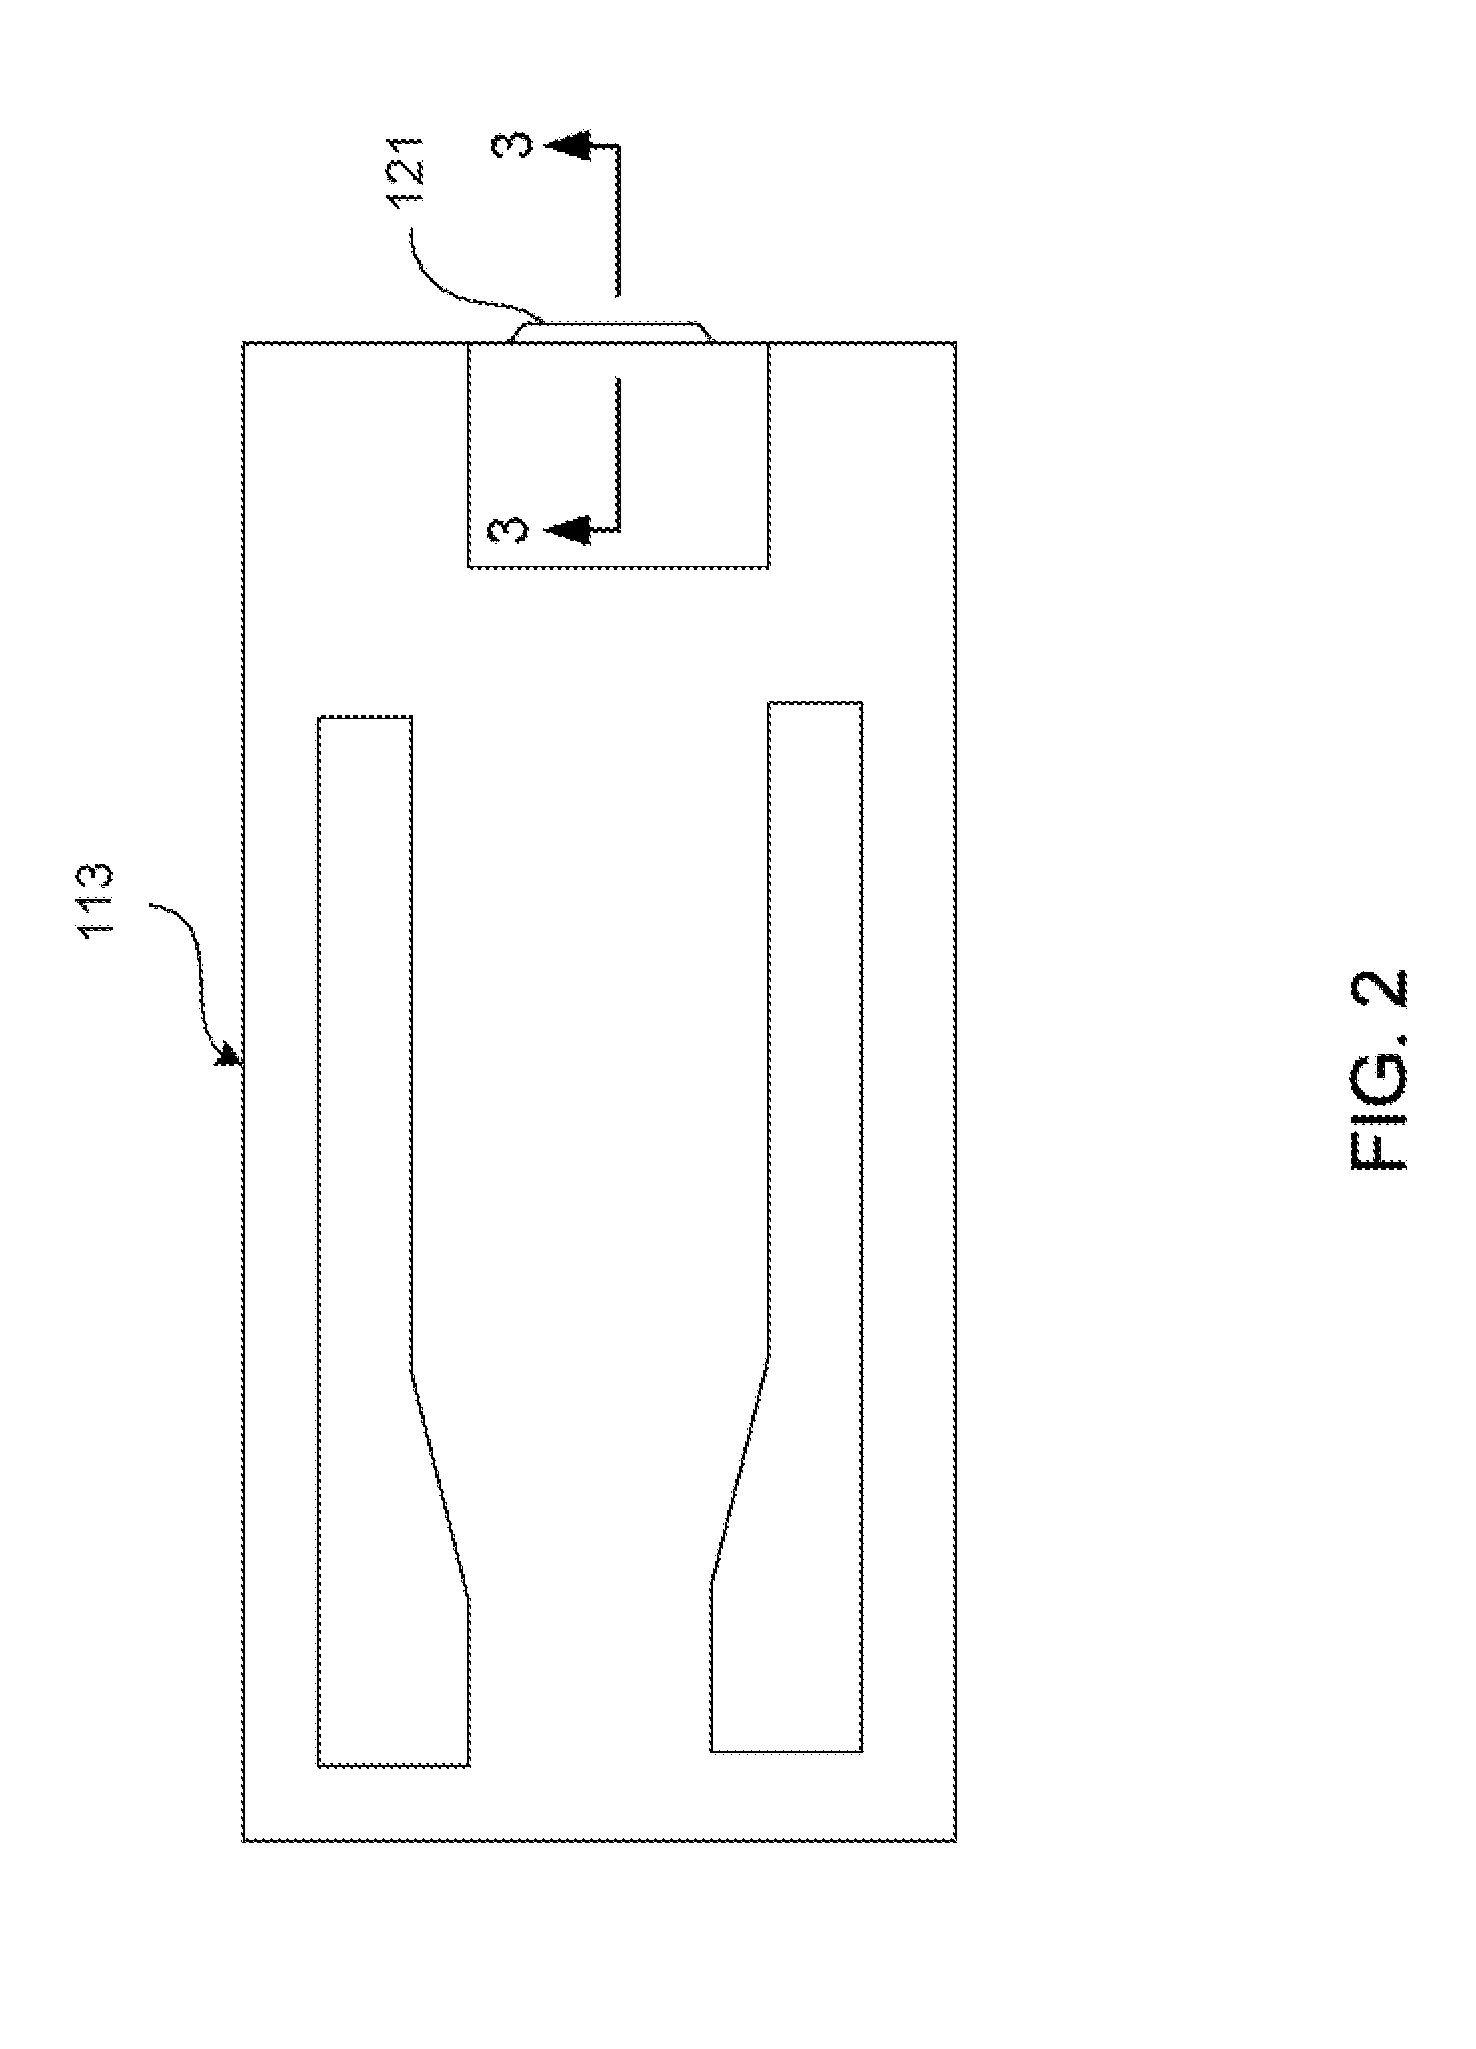 Perpendicular magnetic write head having a conformal, wrap-around, trailing magnetic shield for reduced adjacent track interference